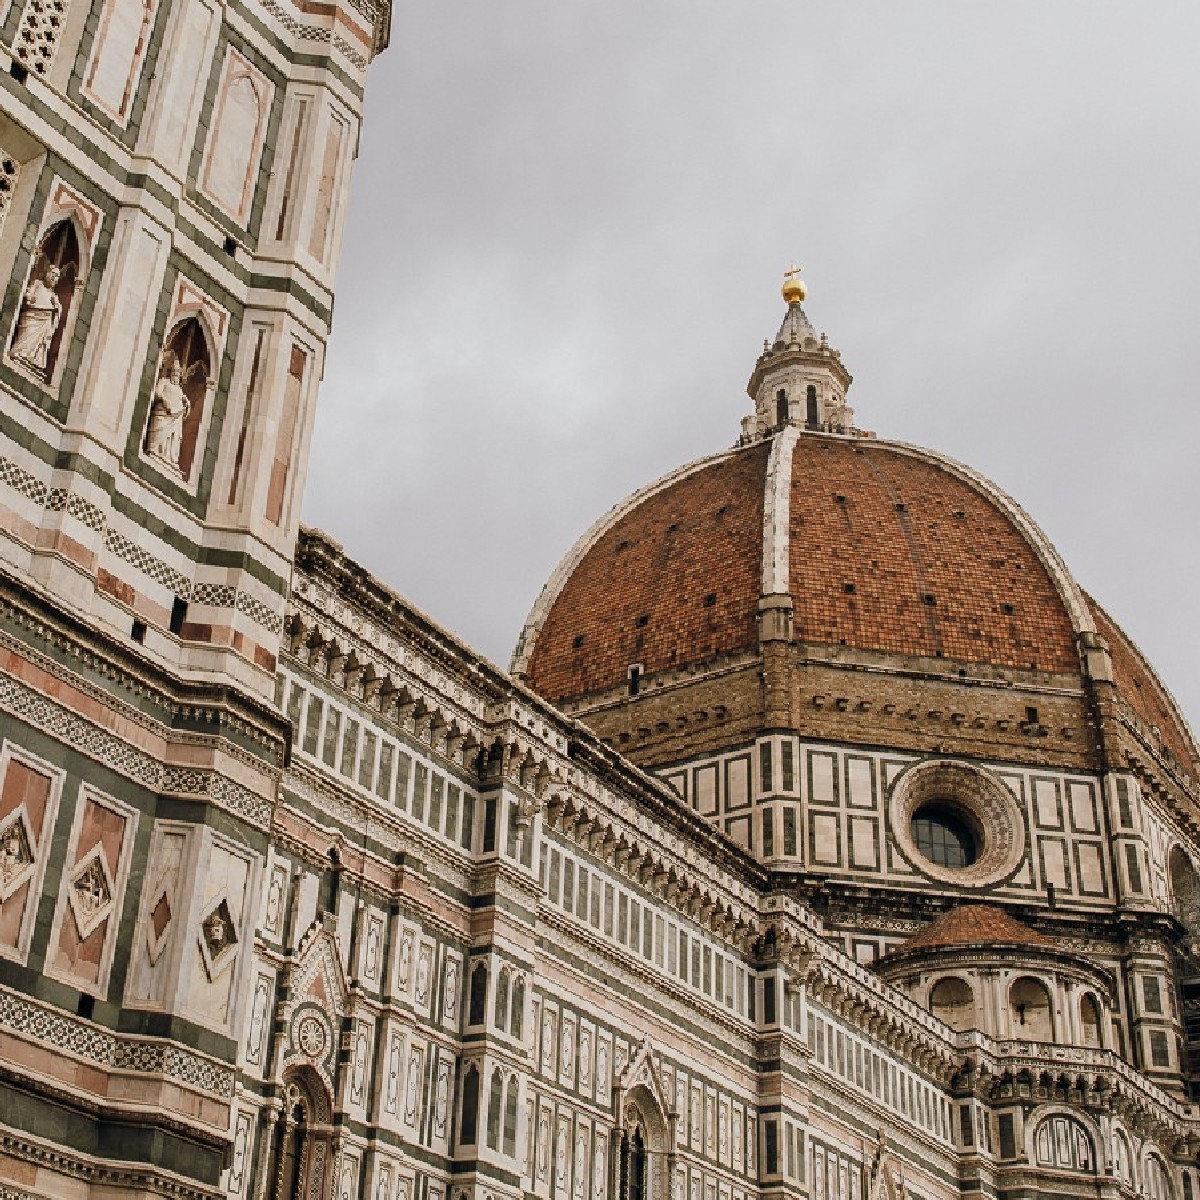 Glimpse Italy's historical grandeur by stepping inside its churches! From the Vatican City to small chapels, explore the country's rich heritage and culture. Be sure to check out our list of the best monuments in Italy - takewalks.co/3SyXgeS - for the full experience.